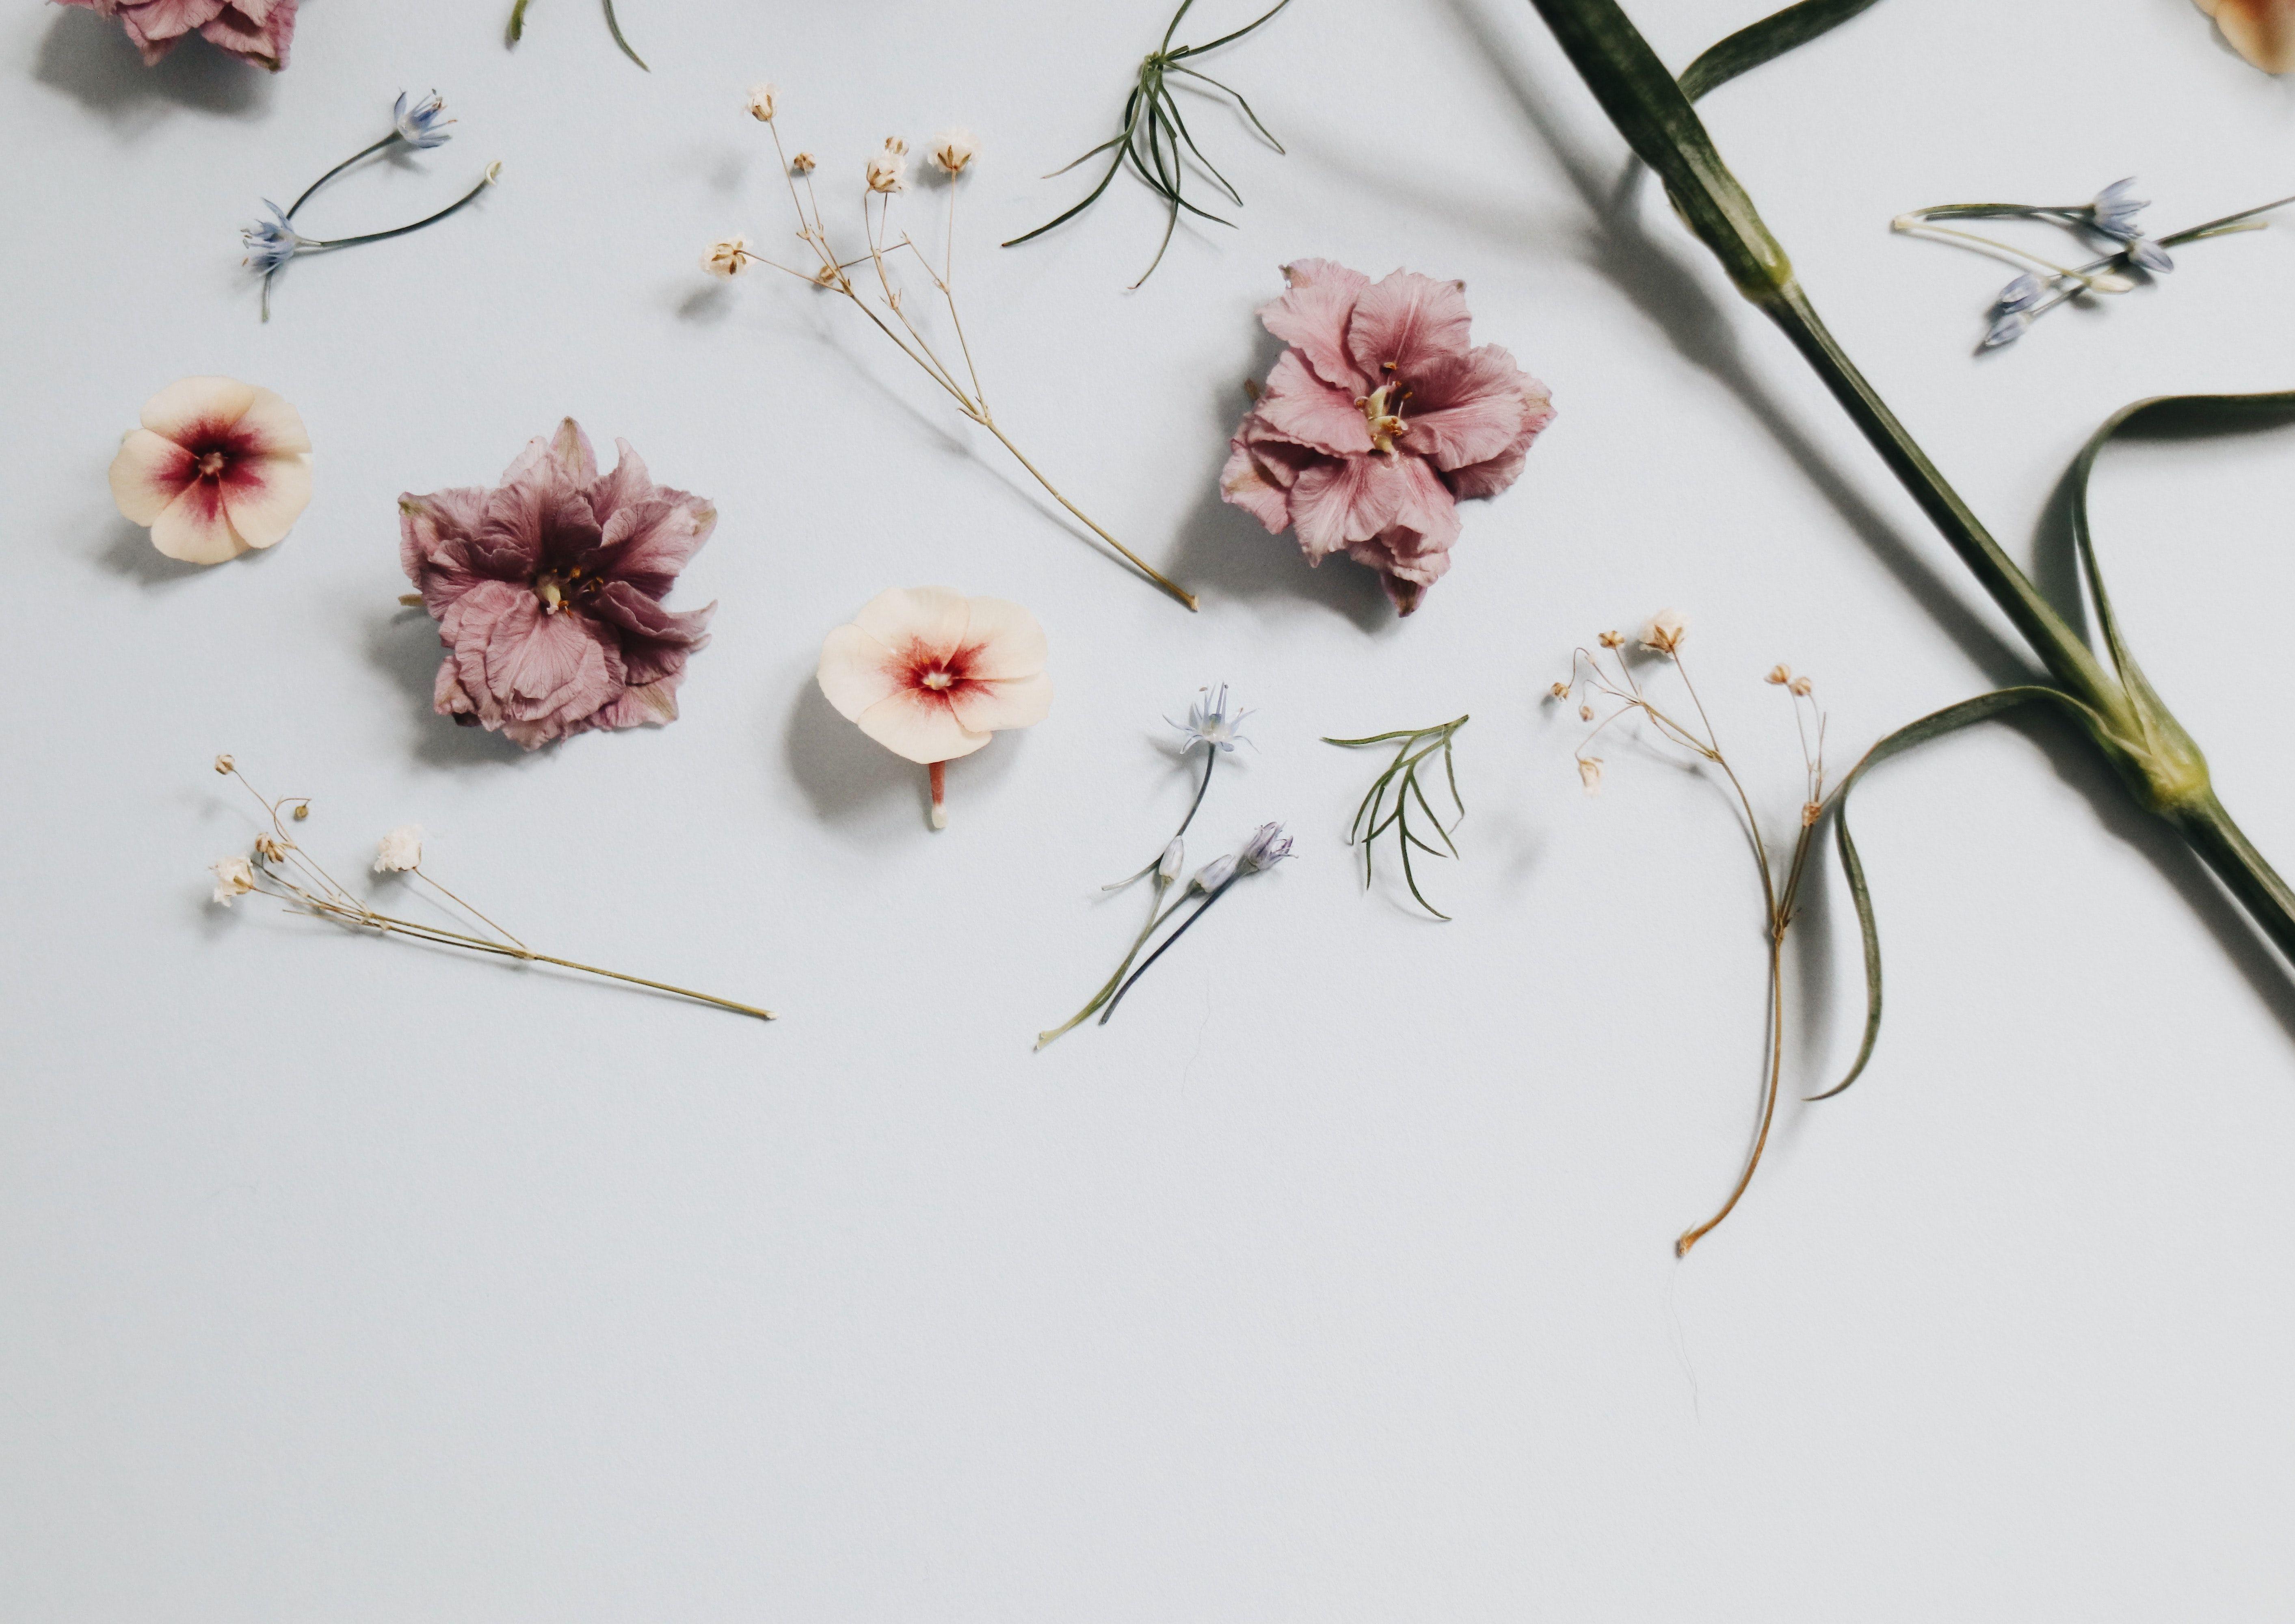 25 Incomparable minimalist aesthetic flower desktop wallpaper You Can